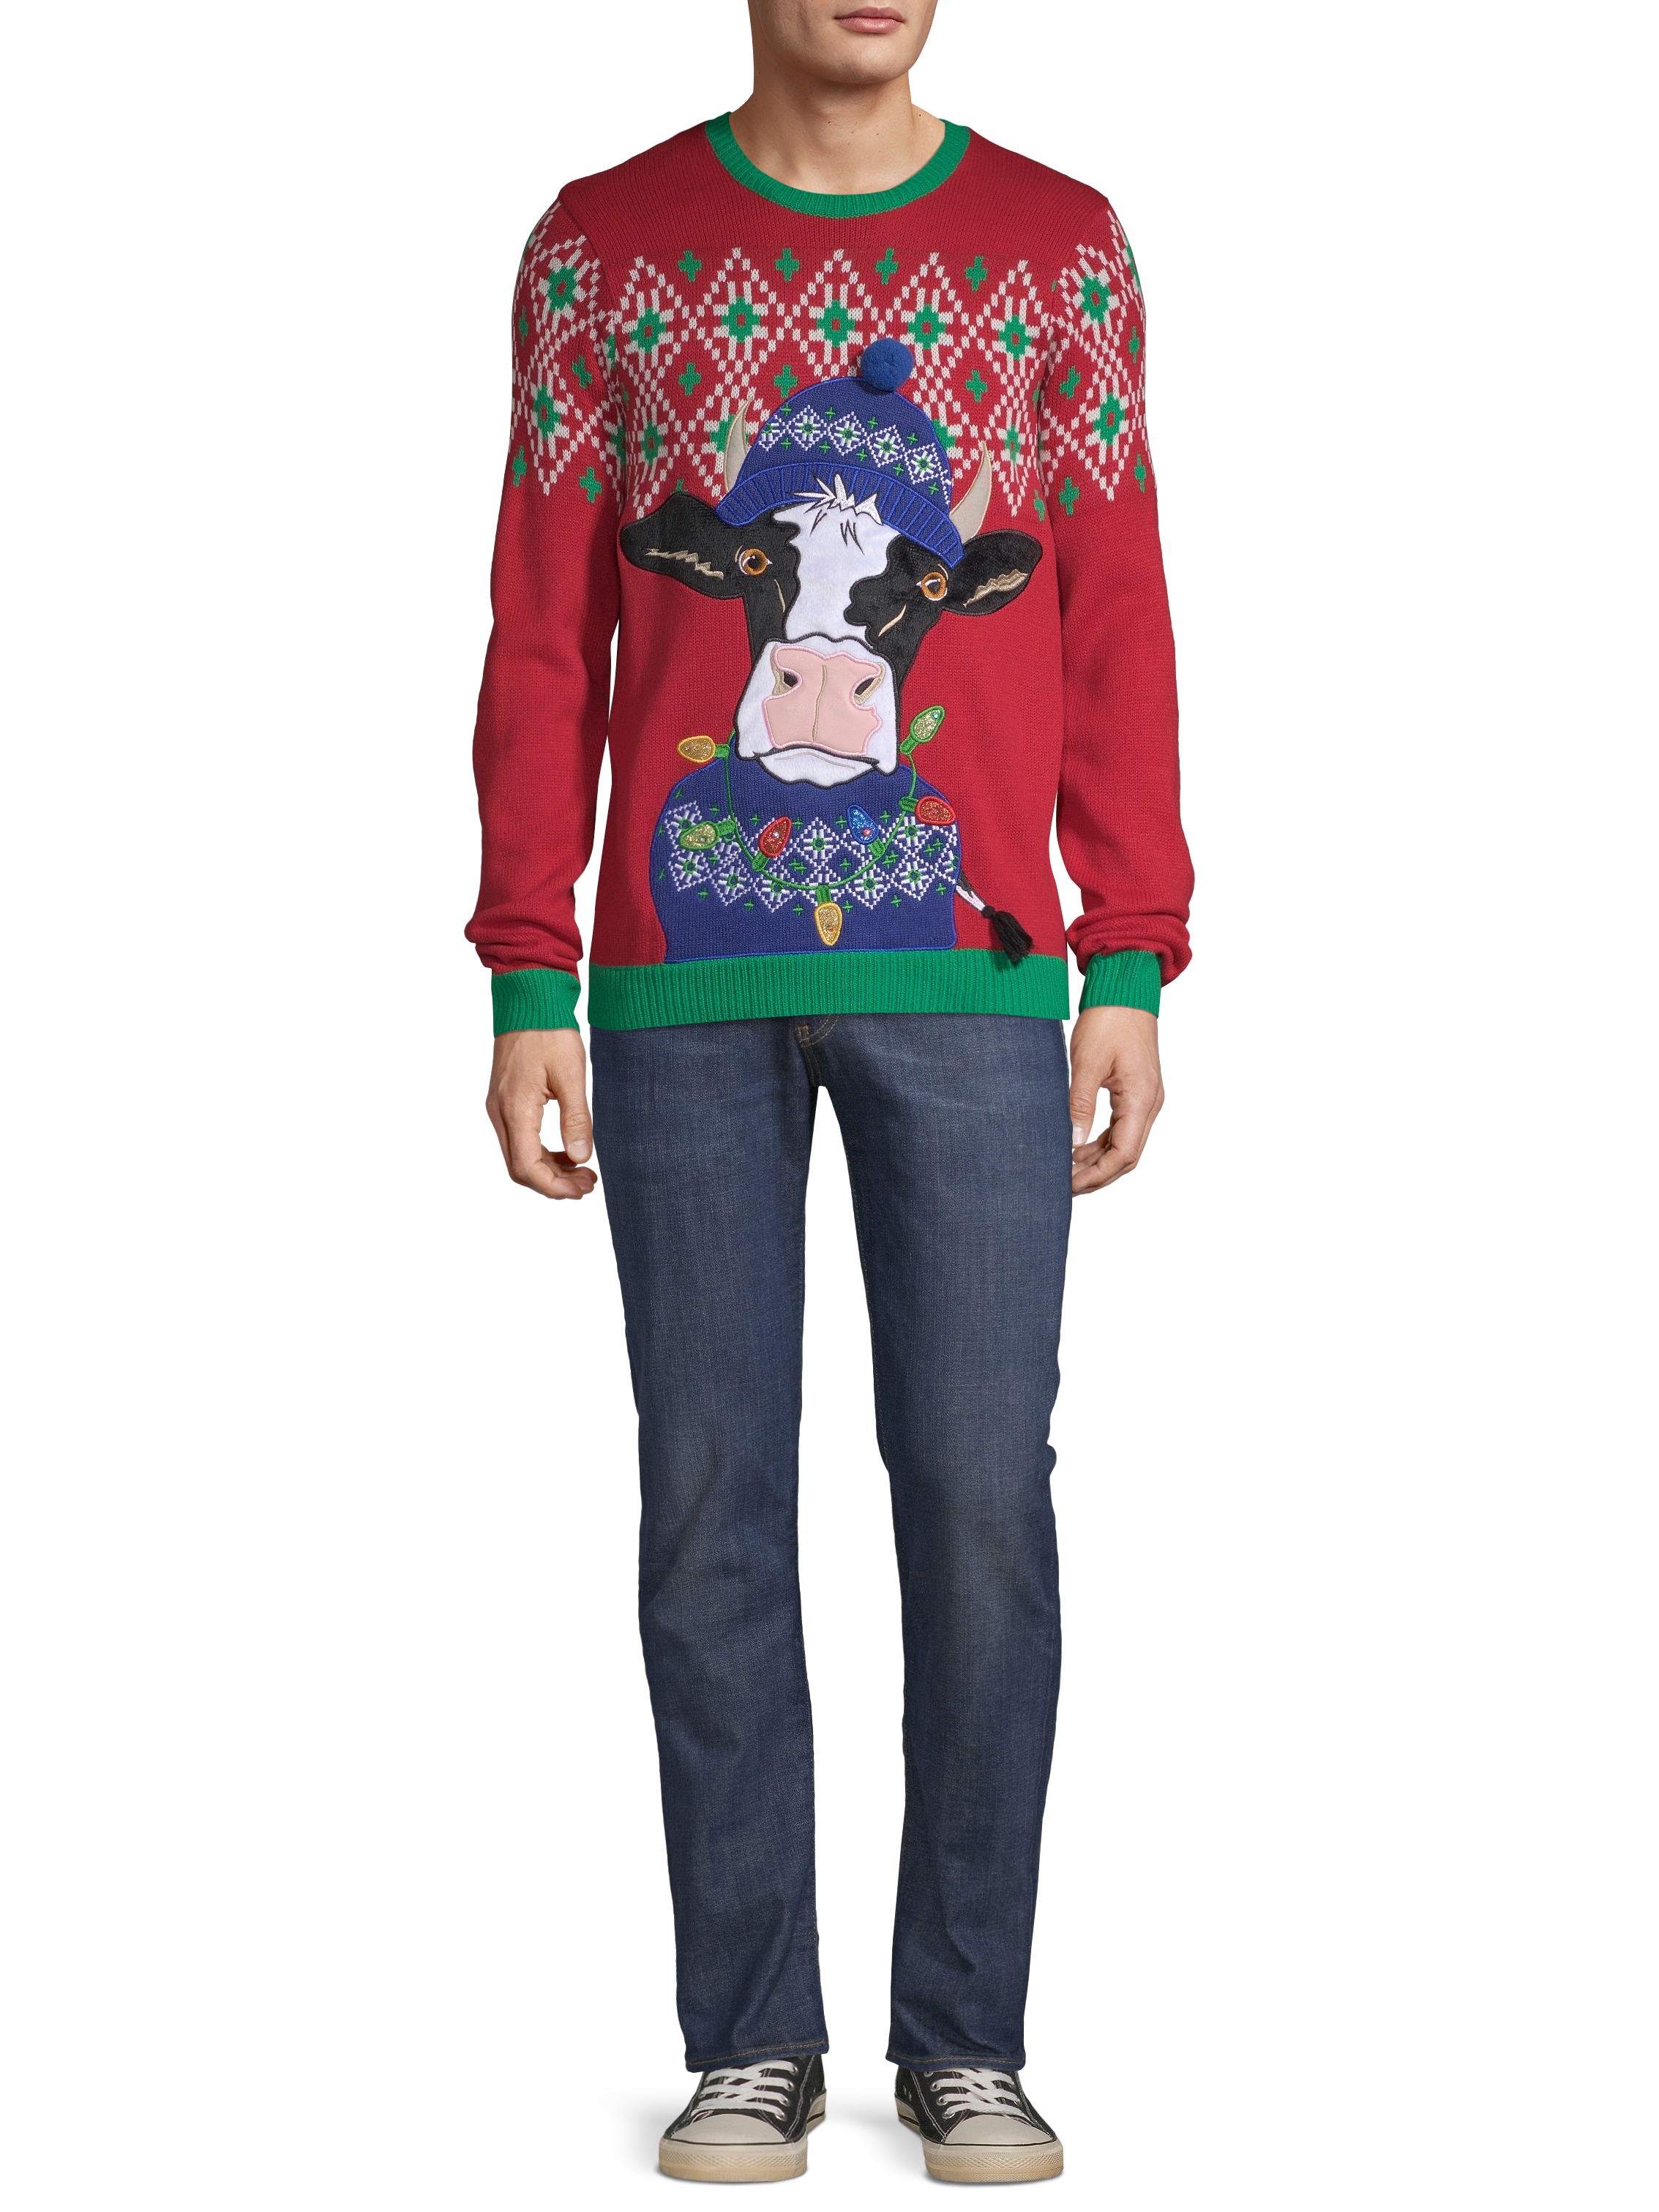 Holiday Time Men's Light-Up Cow Ugly Christmas Sweater - image 5 of 6